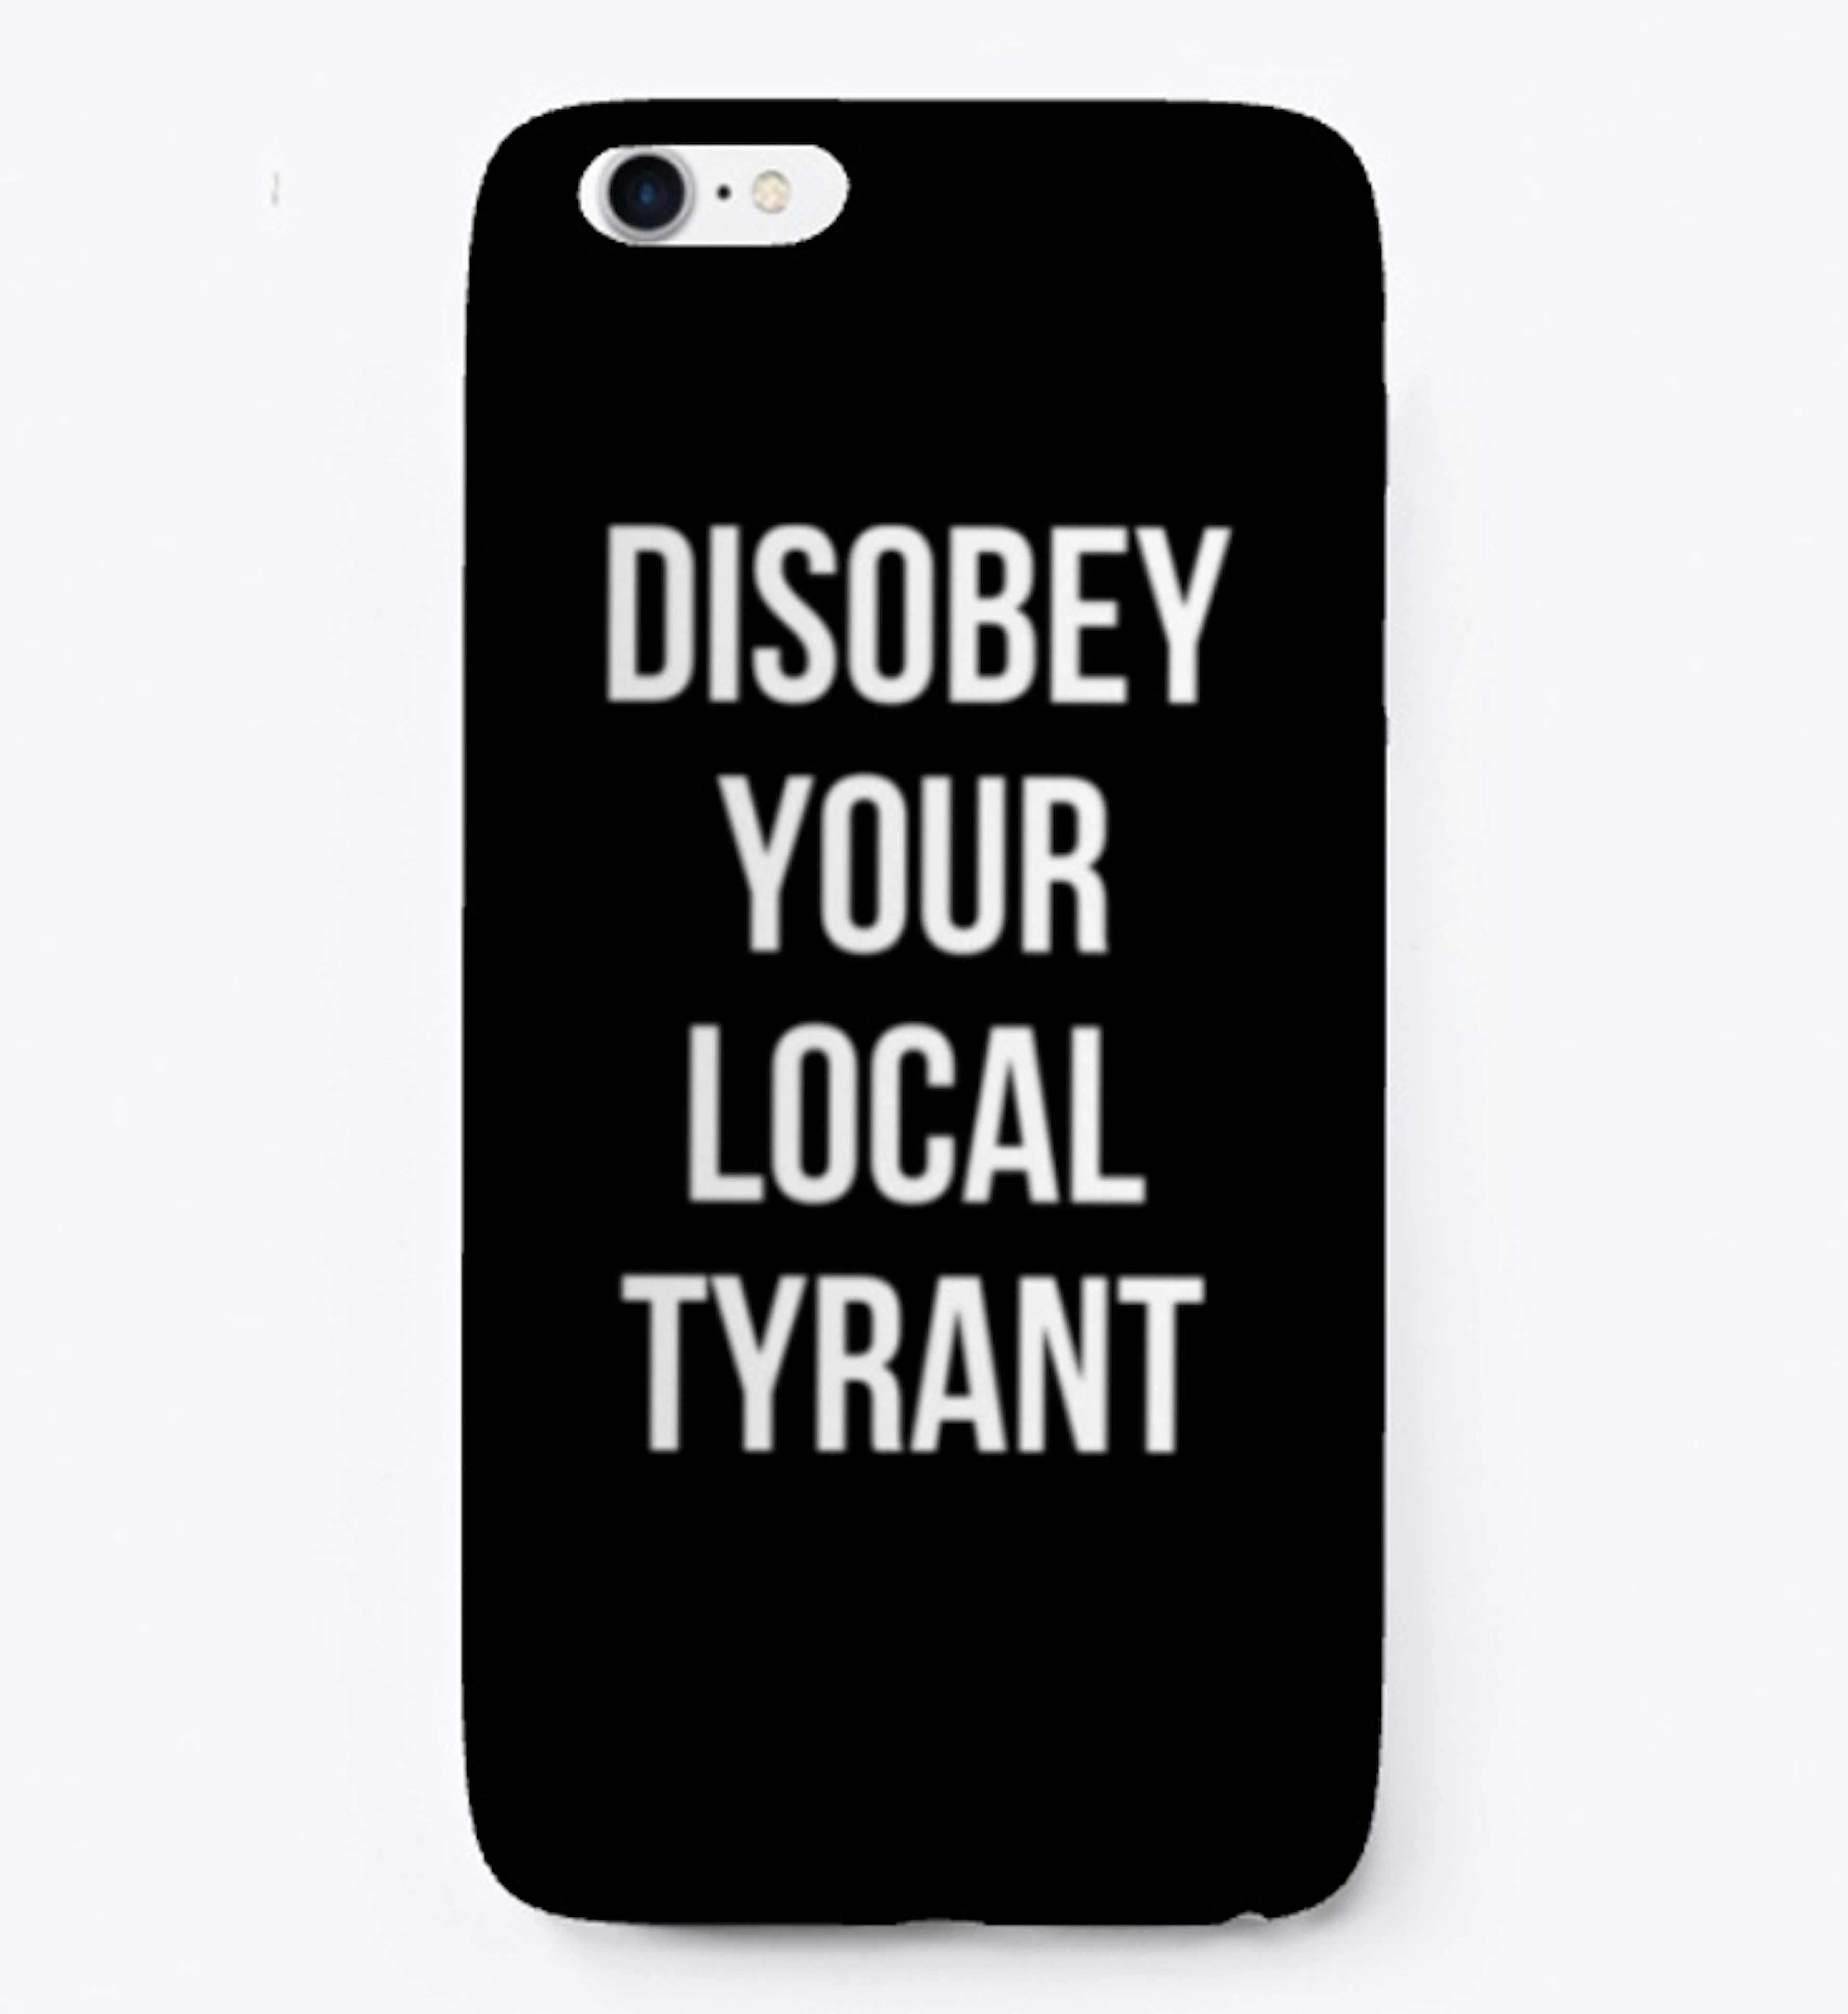 Disobey your local tyrant